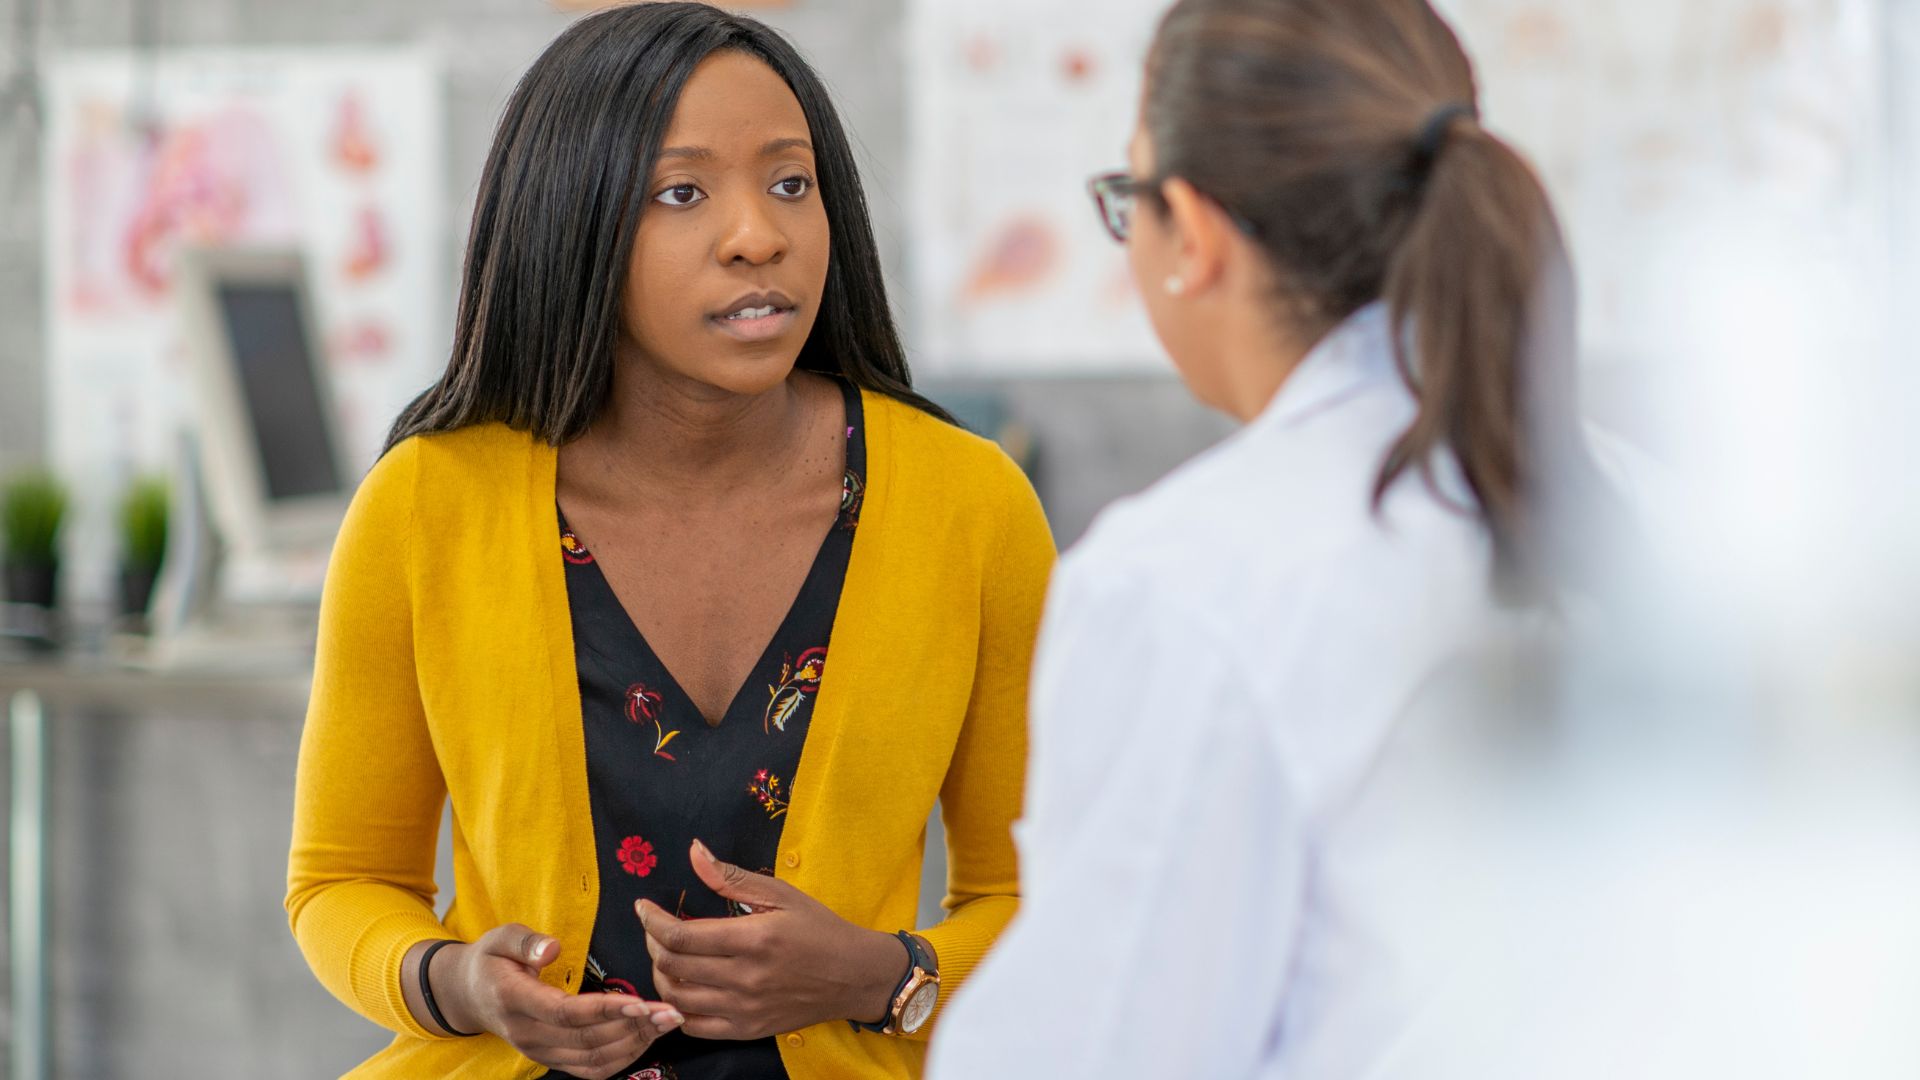 A woman discussing her skin condition with a doctor in a doctor's office, seeking treatment, Myths about Hidradenitis Suppurativa